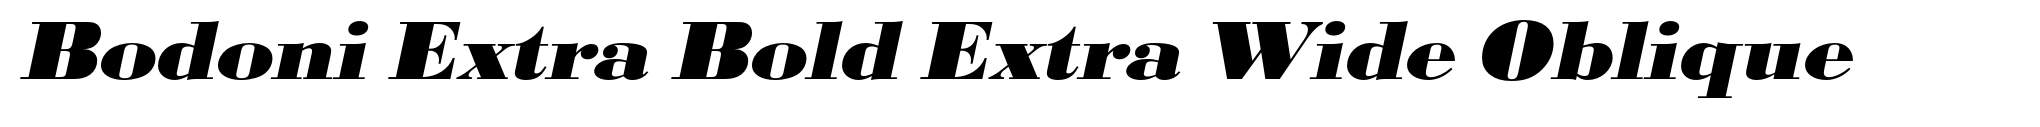 Bodoni Extra Bold Extra Wide Oblique image